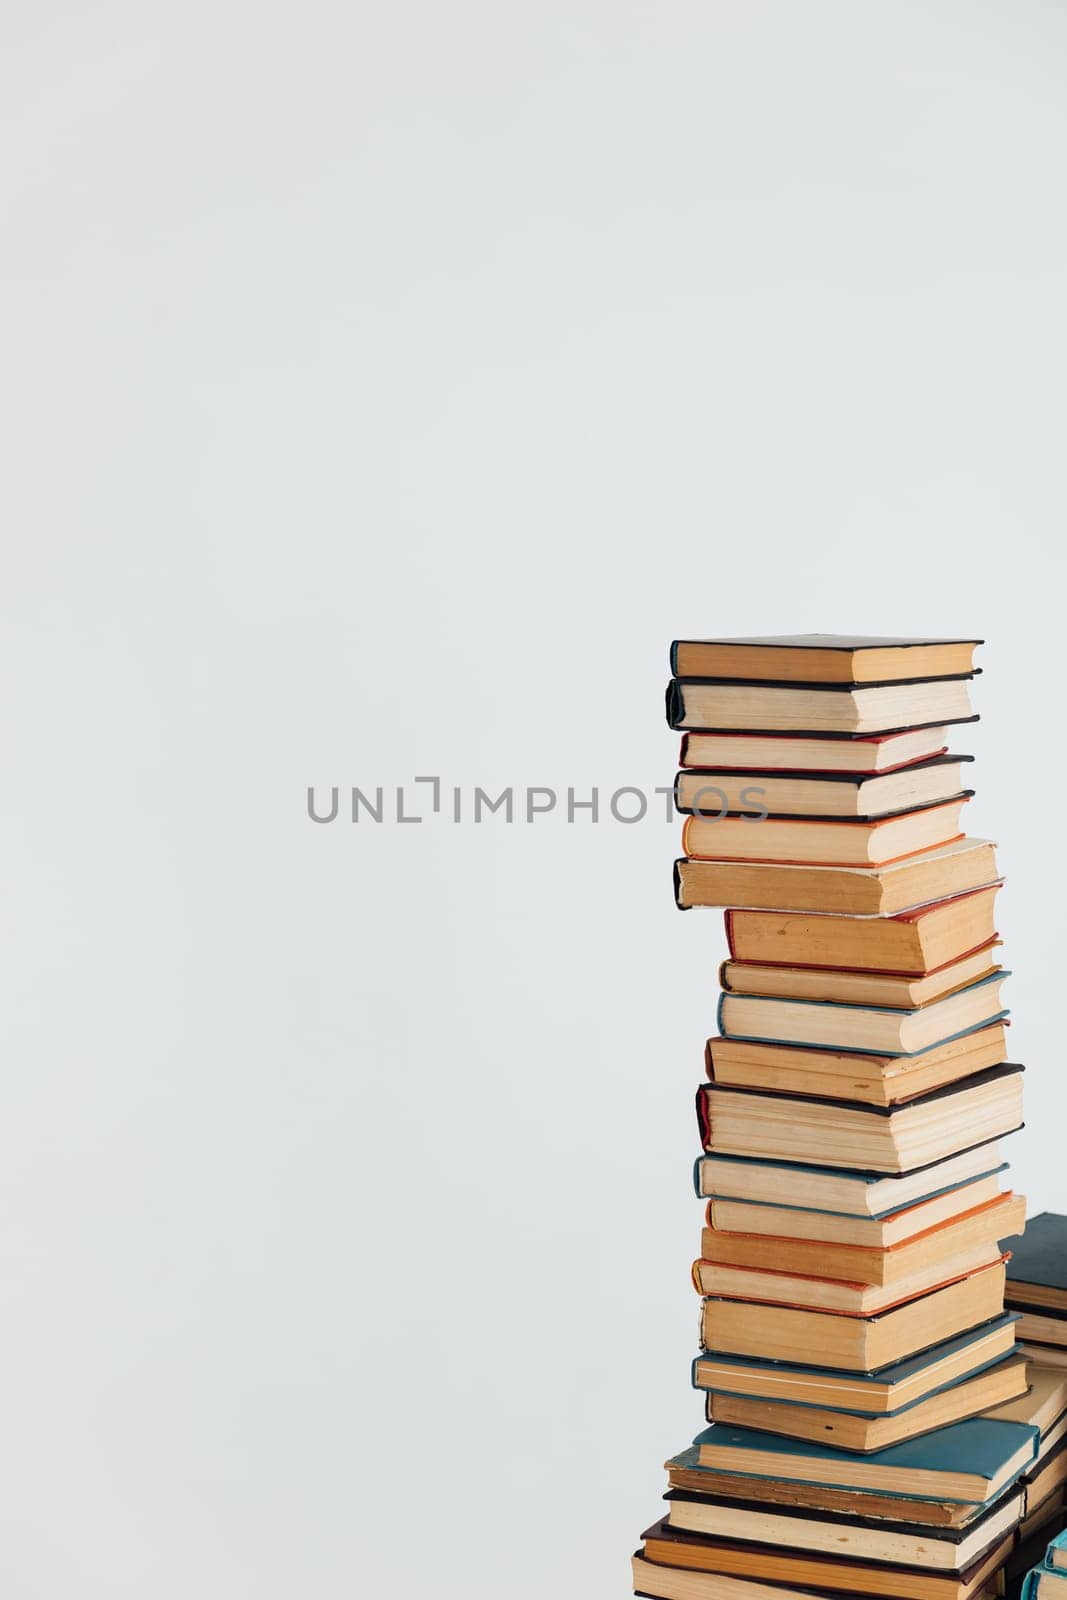 Stacks of books in university library on white background